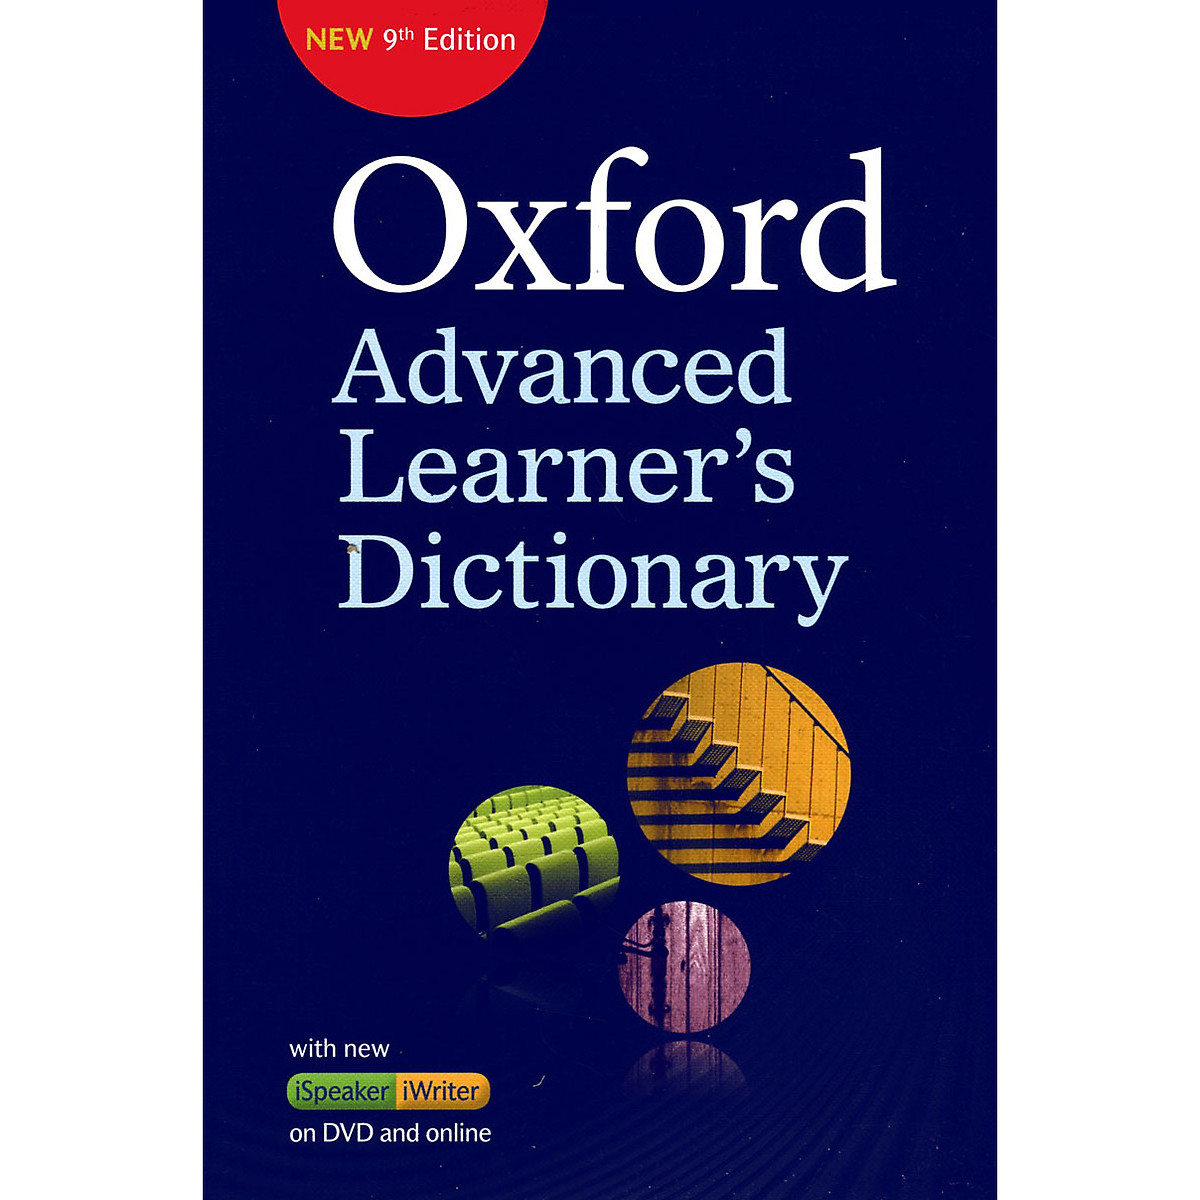 Oxford Advanced Learner's Dictionary Paperback + DVD + Premium Online Access Code (includes Oxford iWriter) (9th Edition)